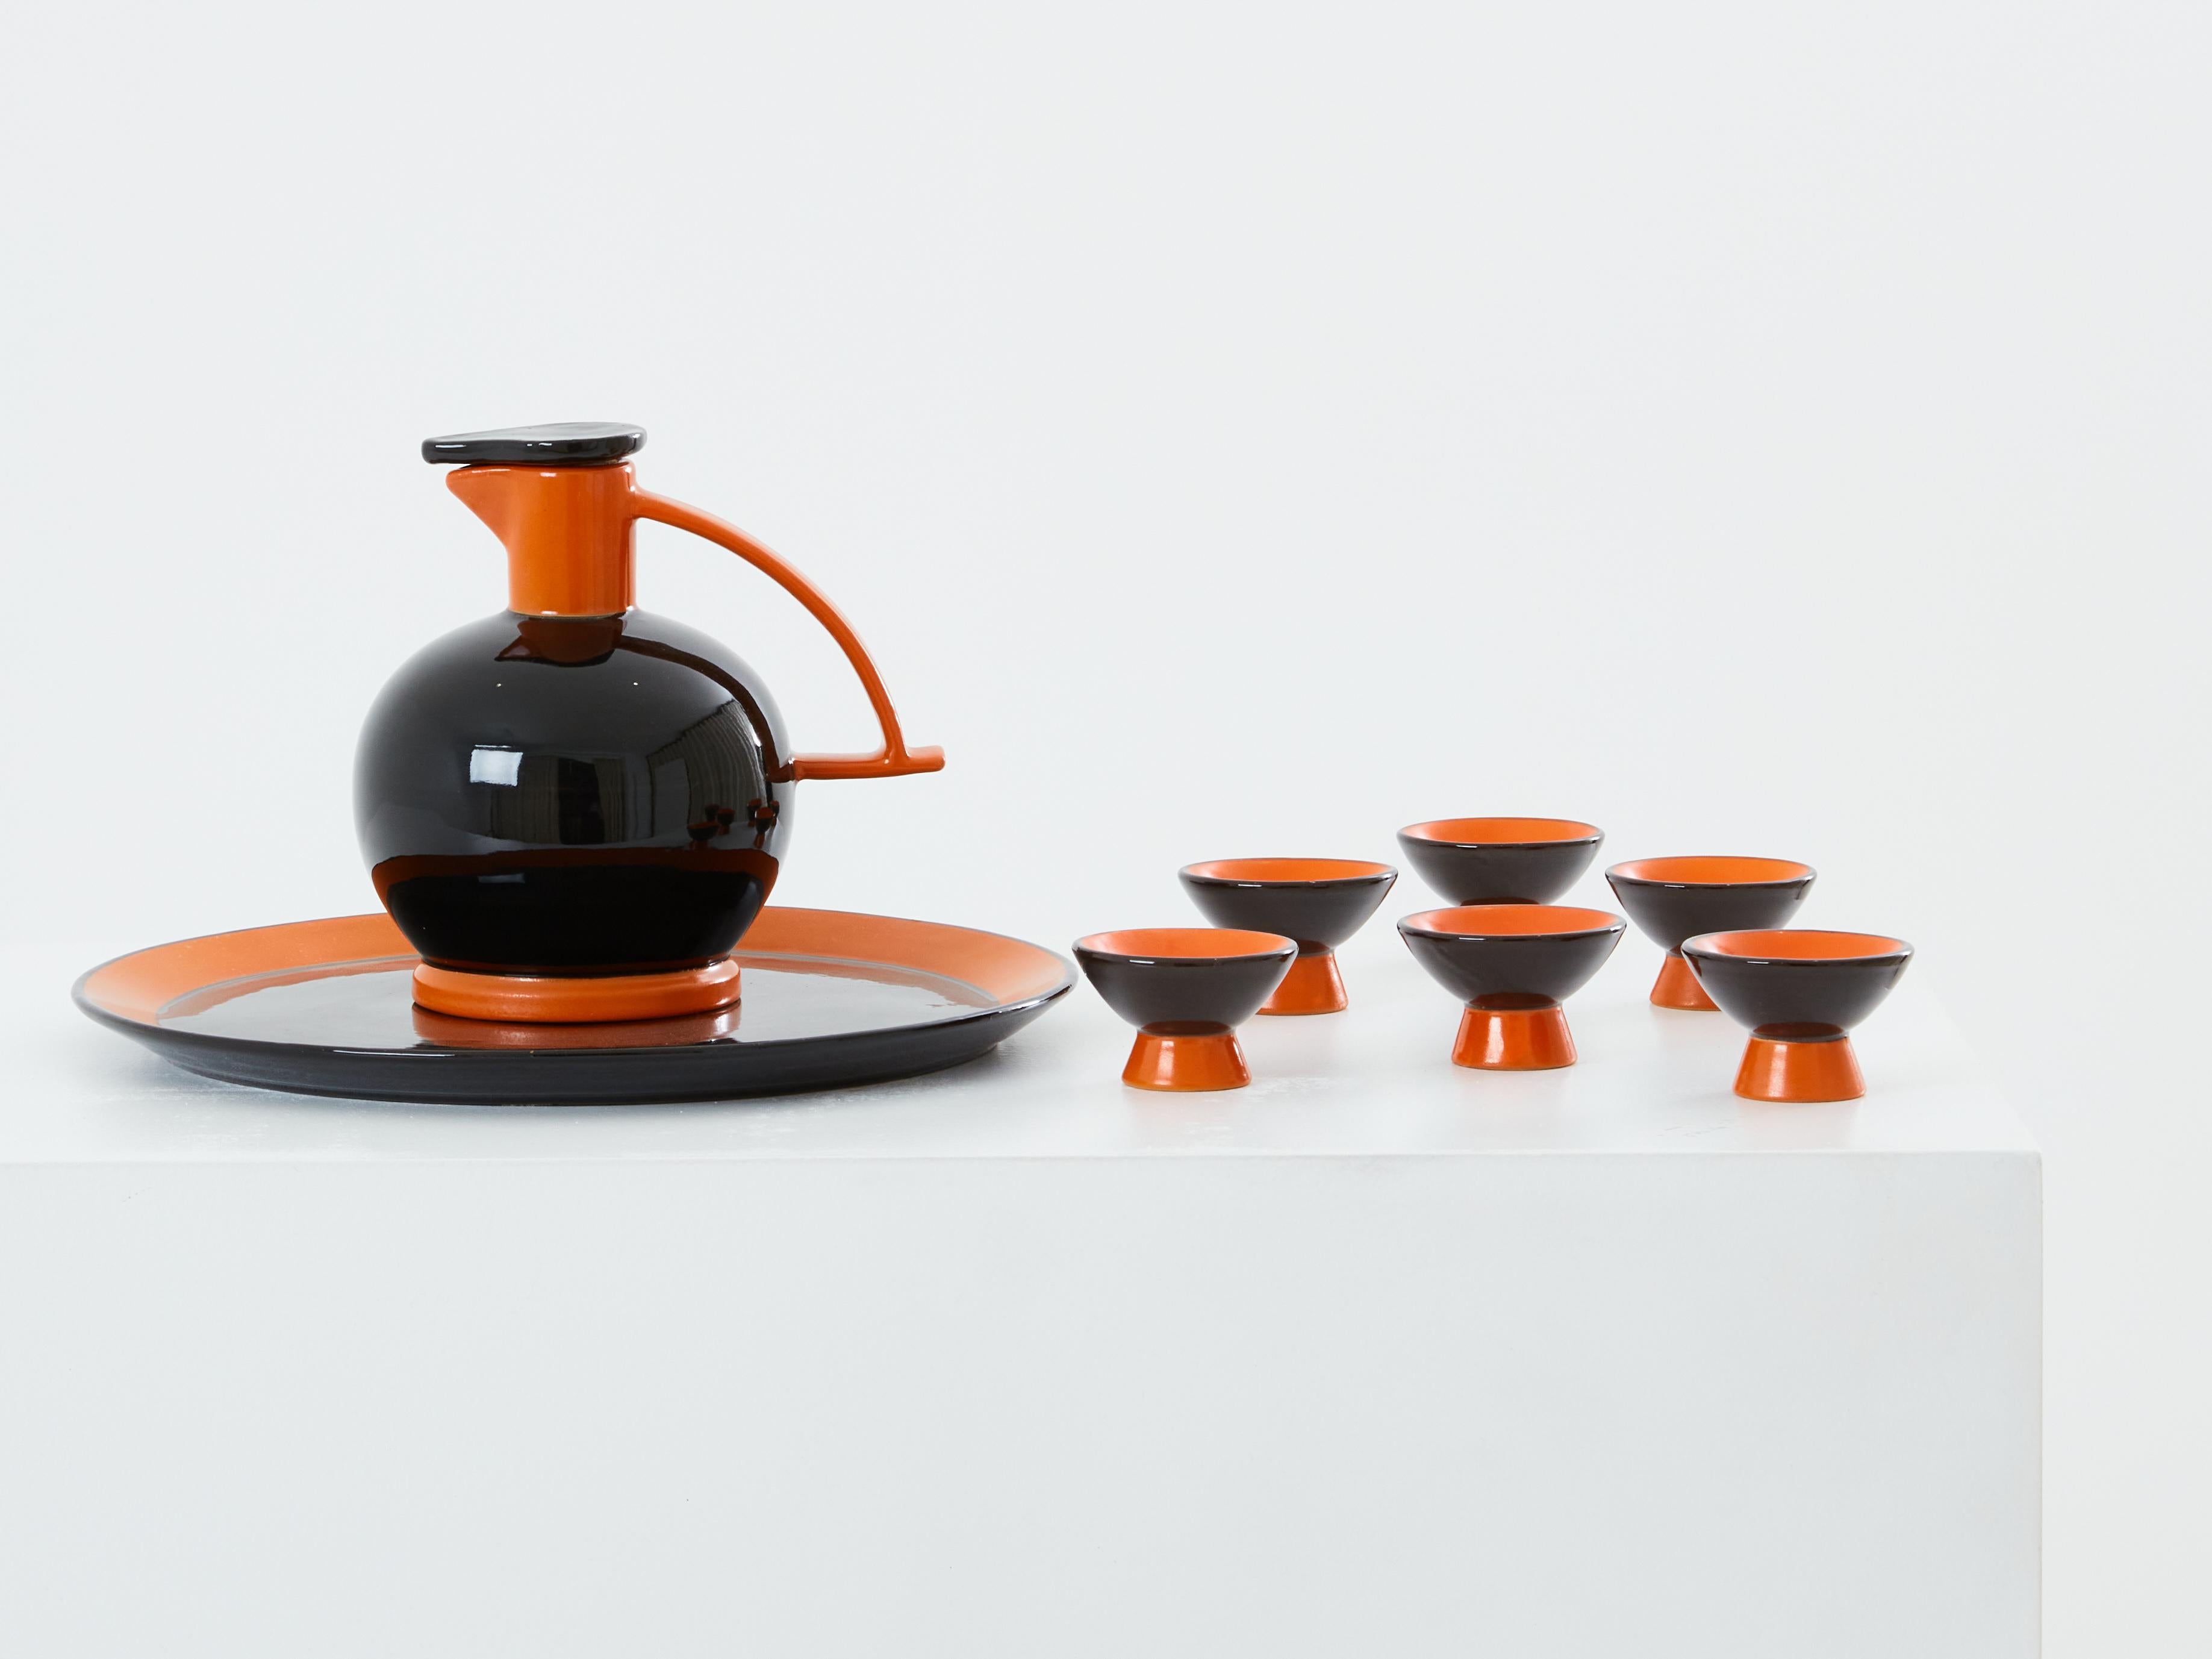 This liqueur set was designed by Dante Baldelli for the renowned Italian ceramicist Rometti Umbertide in 1930. It consists of a liqueur decanter, six matching glasses, and a round tray. Each piece of this glazed ceramic set features distinctive